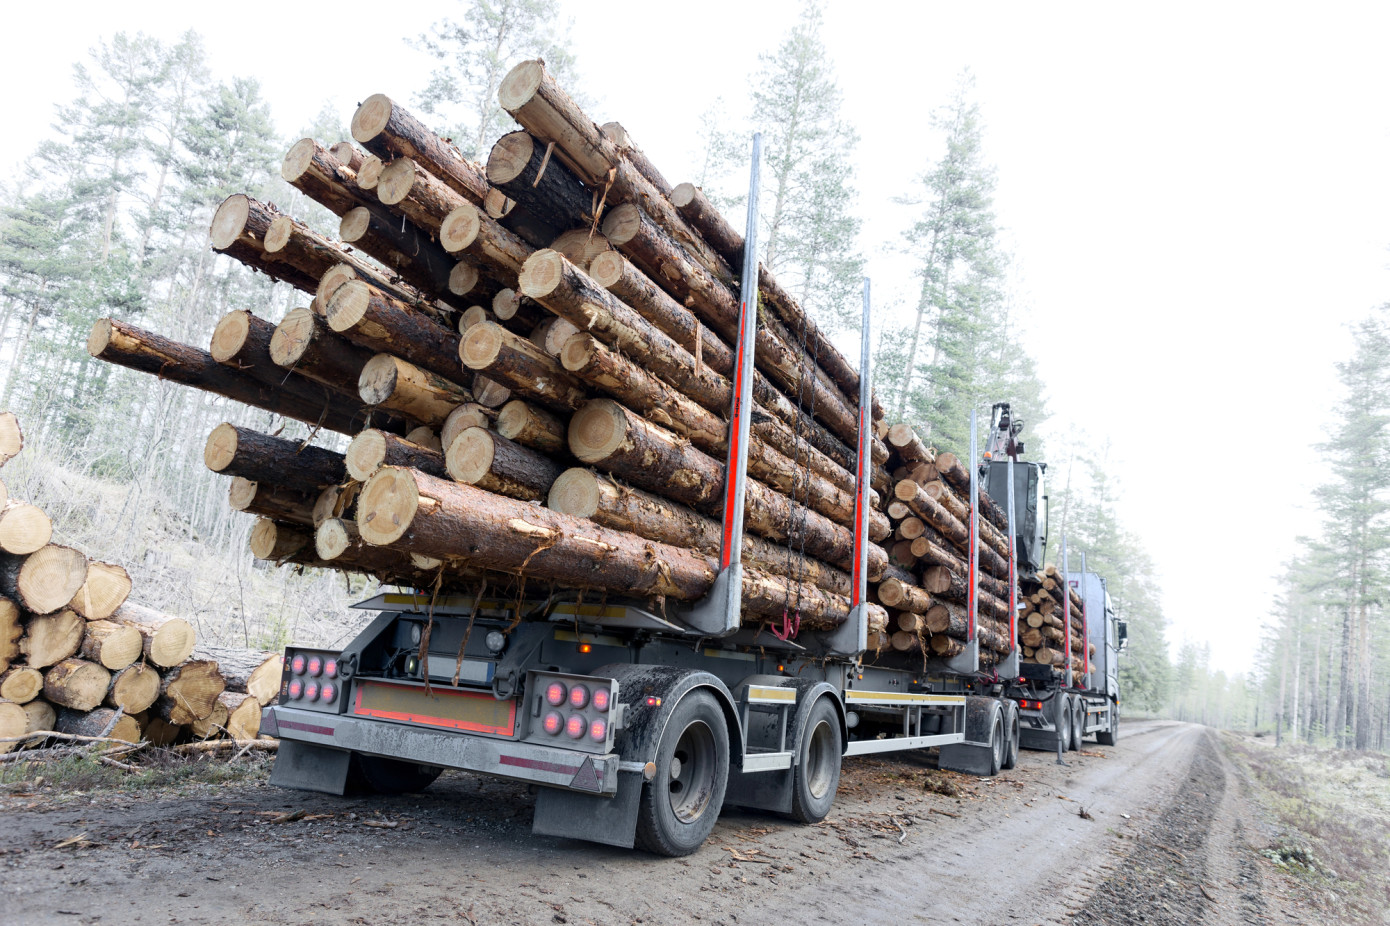 Swedish forests face sweeping changes: enhanced carbon storage could reshape entire industry